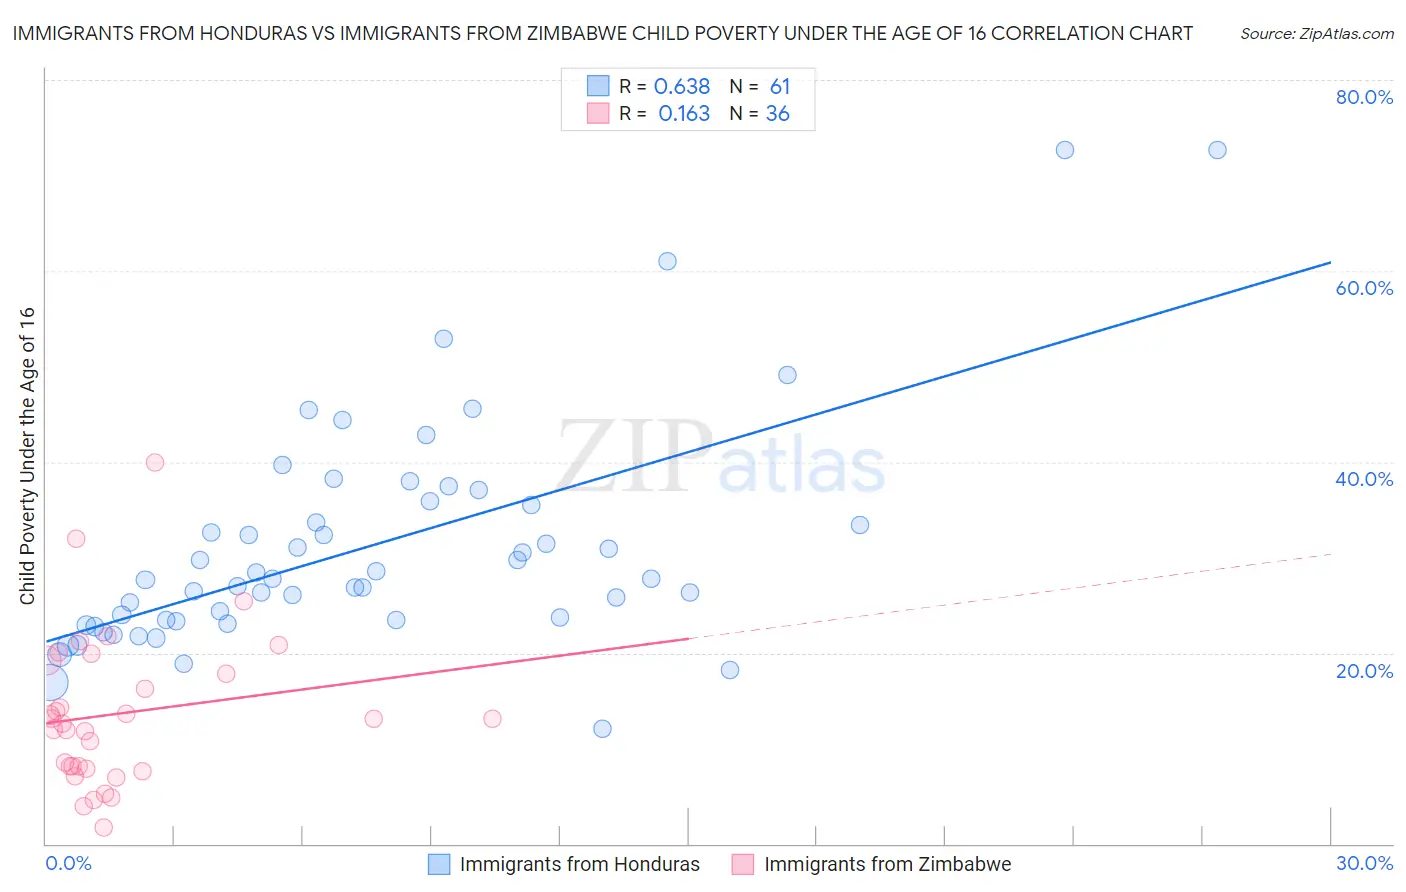 Immigrants from Honduras vs Immigrants from Zimbabwe Child Poverty Under the Age of 16